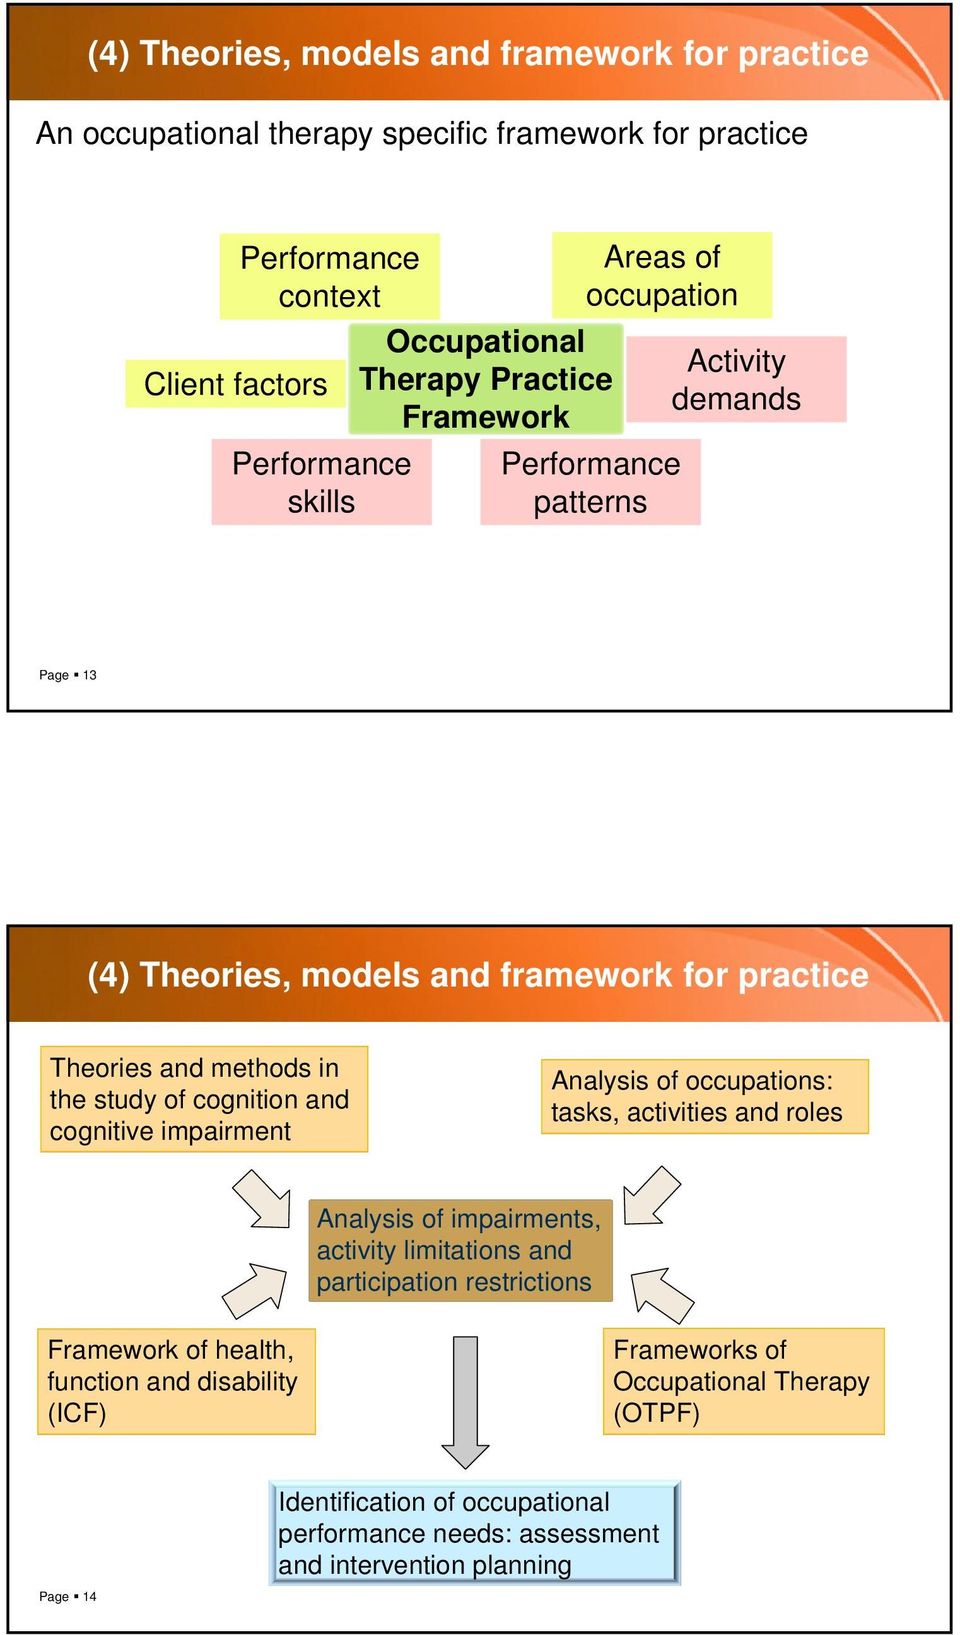 of cognition and cognitive impairment Analysis of occupations: tasks, activities and roles Analysis of impairments, activity limitations and participation restrictions